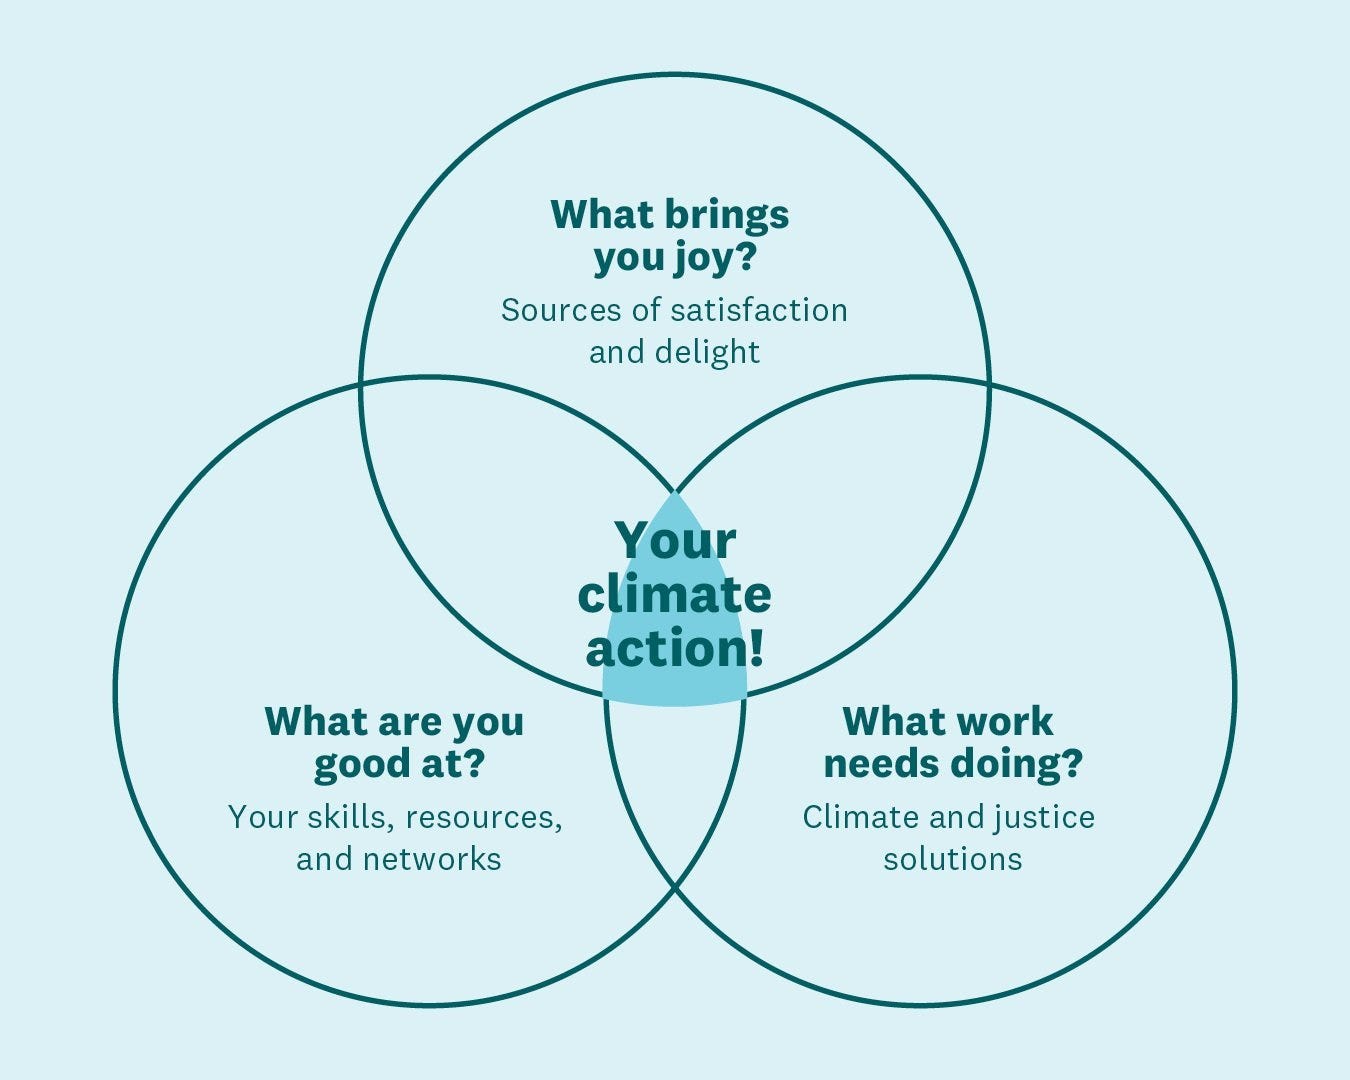 Three circle Venn Diagram - What brings you joy, what are you good at, what work needs doing, with "your climate action" in the center